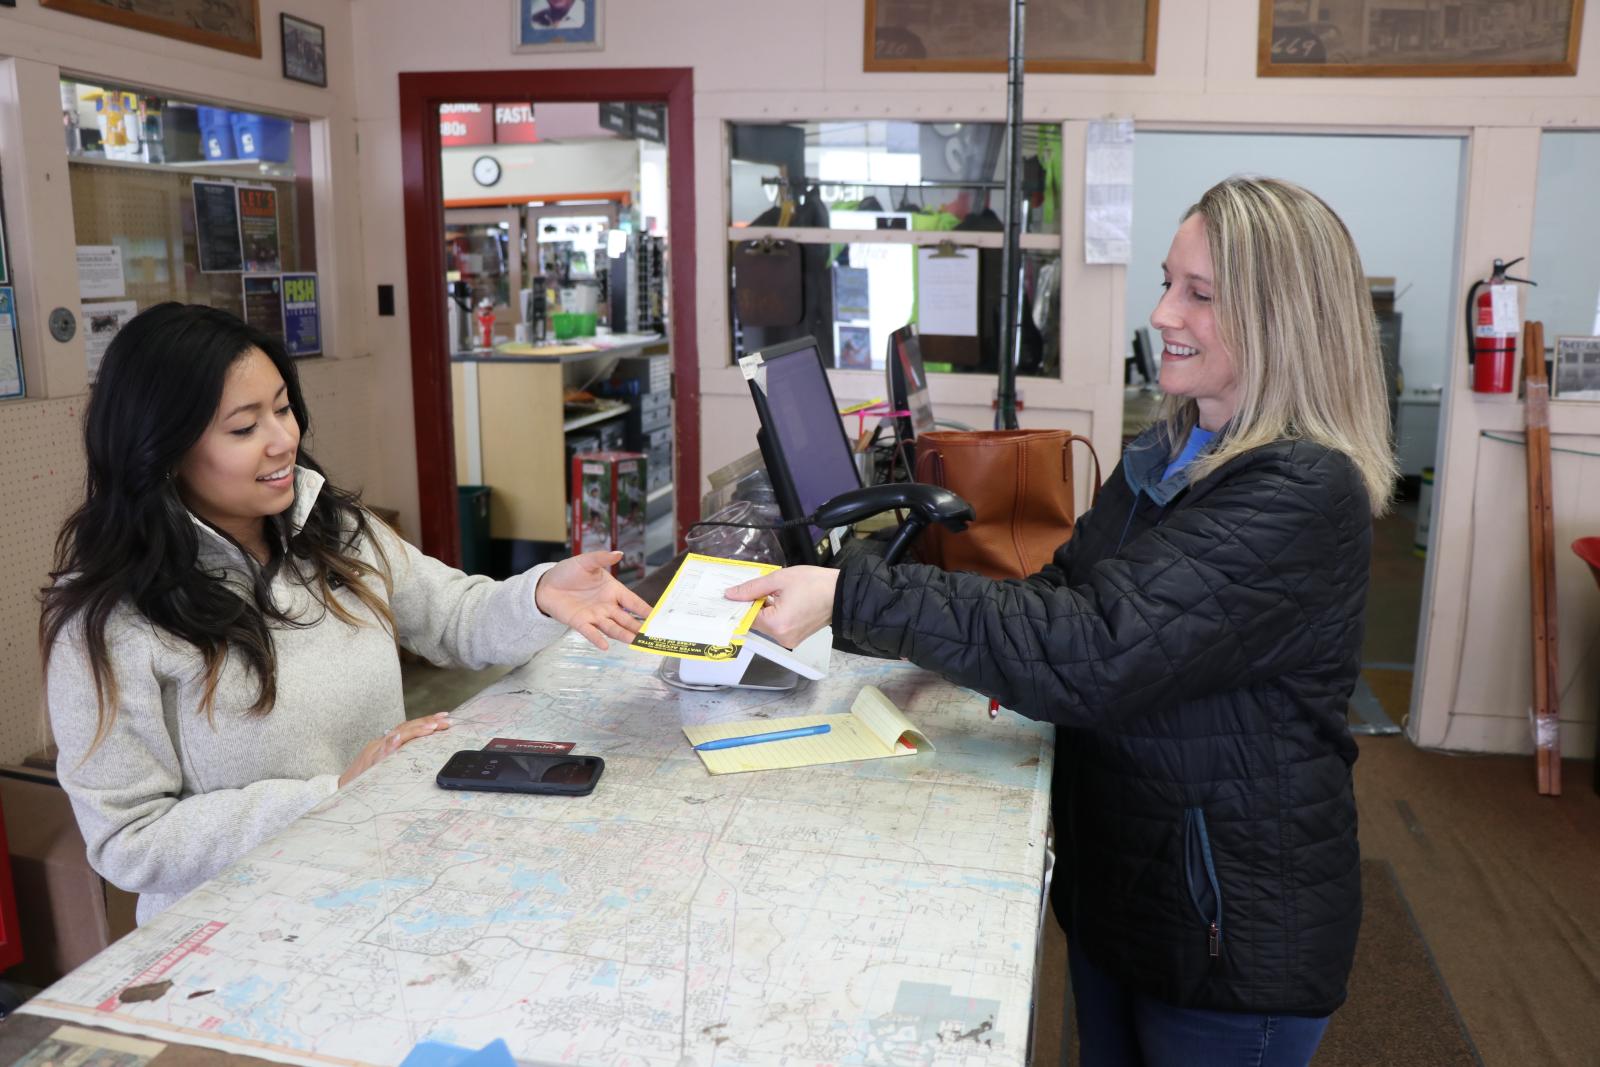 A woman buys a hunting license from a license dealer.